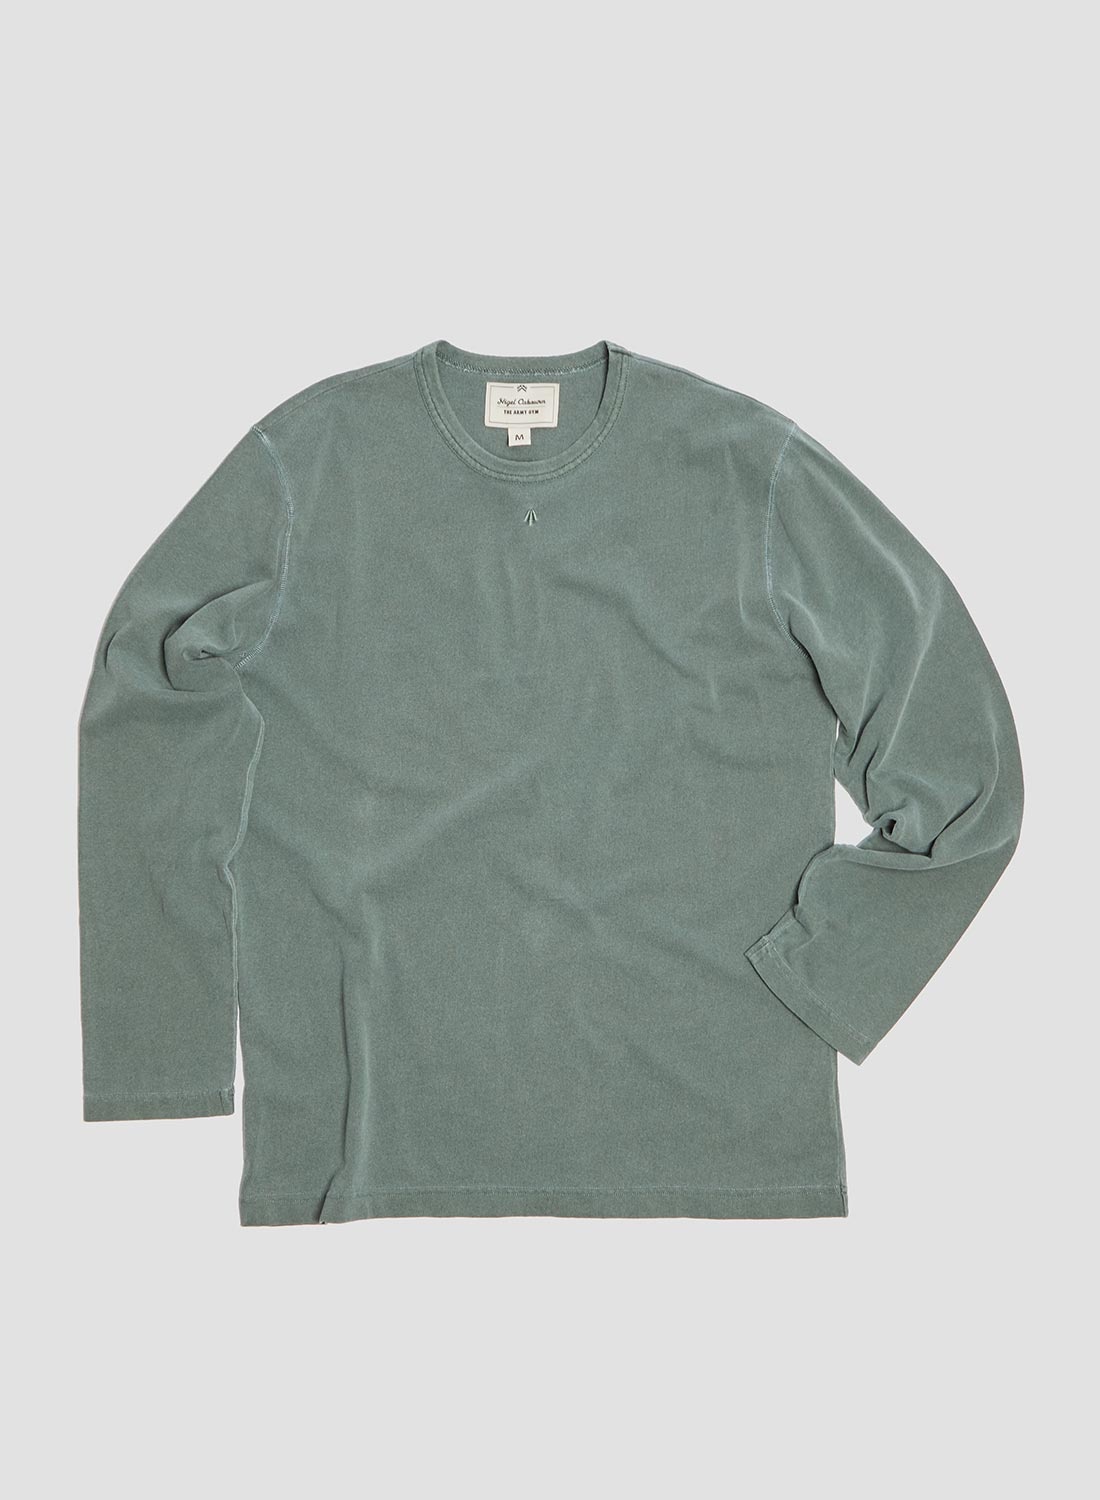 Embroidered Arrow Long Sleeve Tee in Sports Green - 1